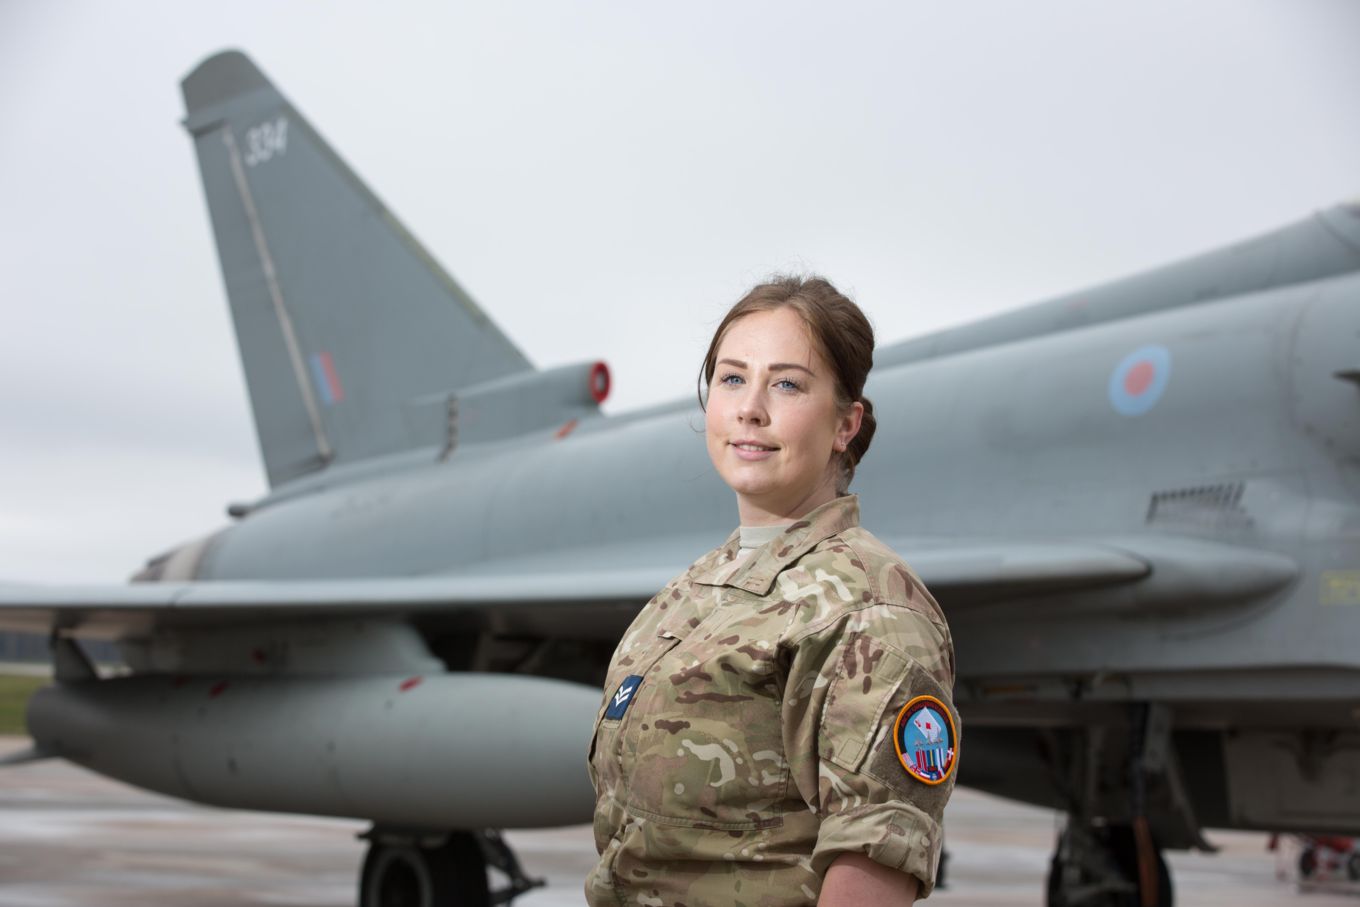 Corporal Tania Barr on Arctic Challenge Exercise